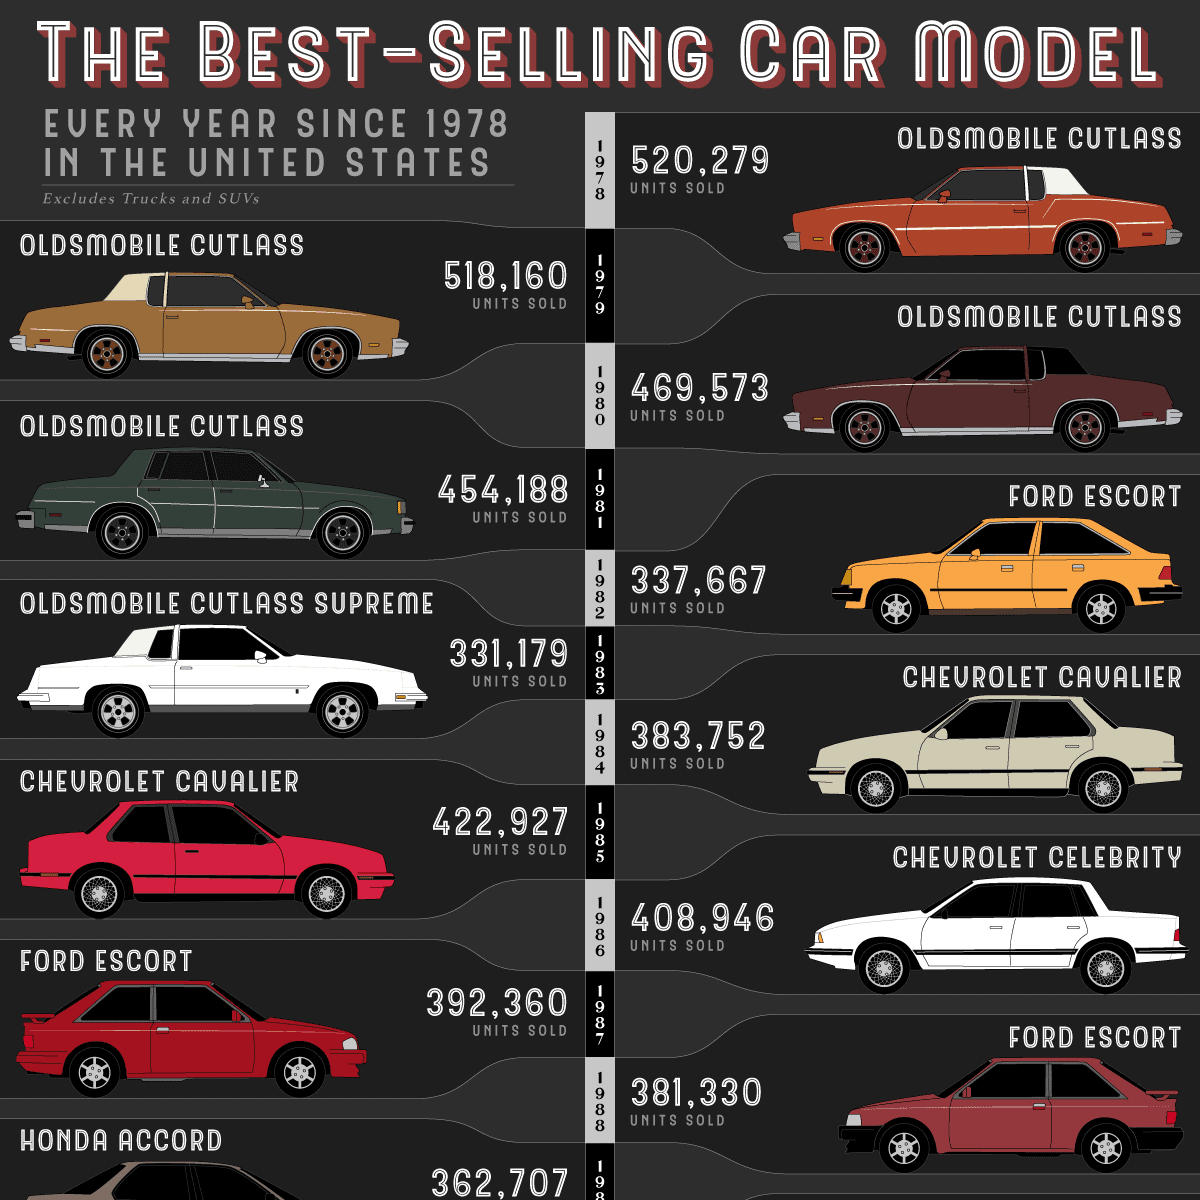 The Best-Selling Car Model Every Year Since 1978 in the United States